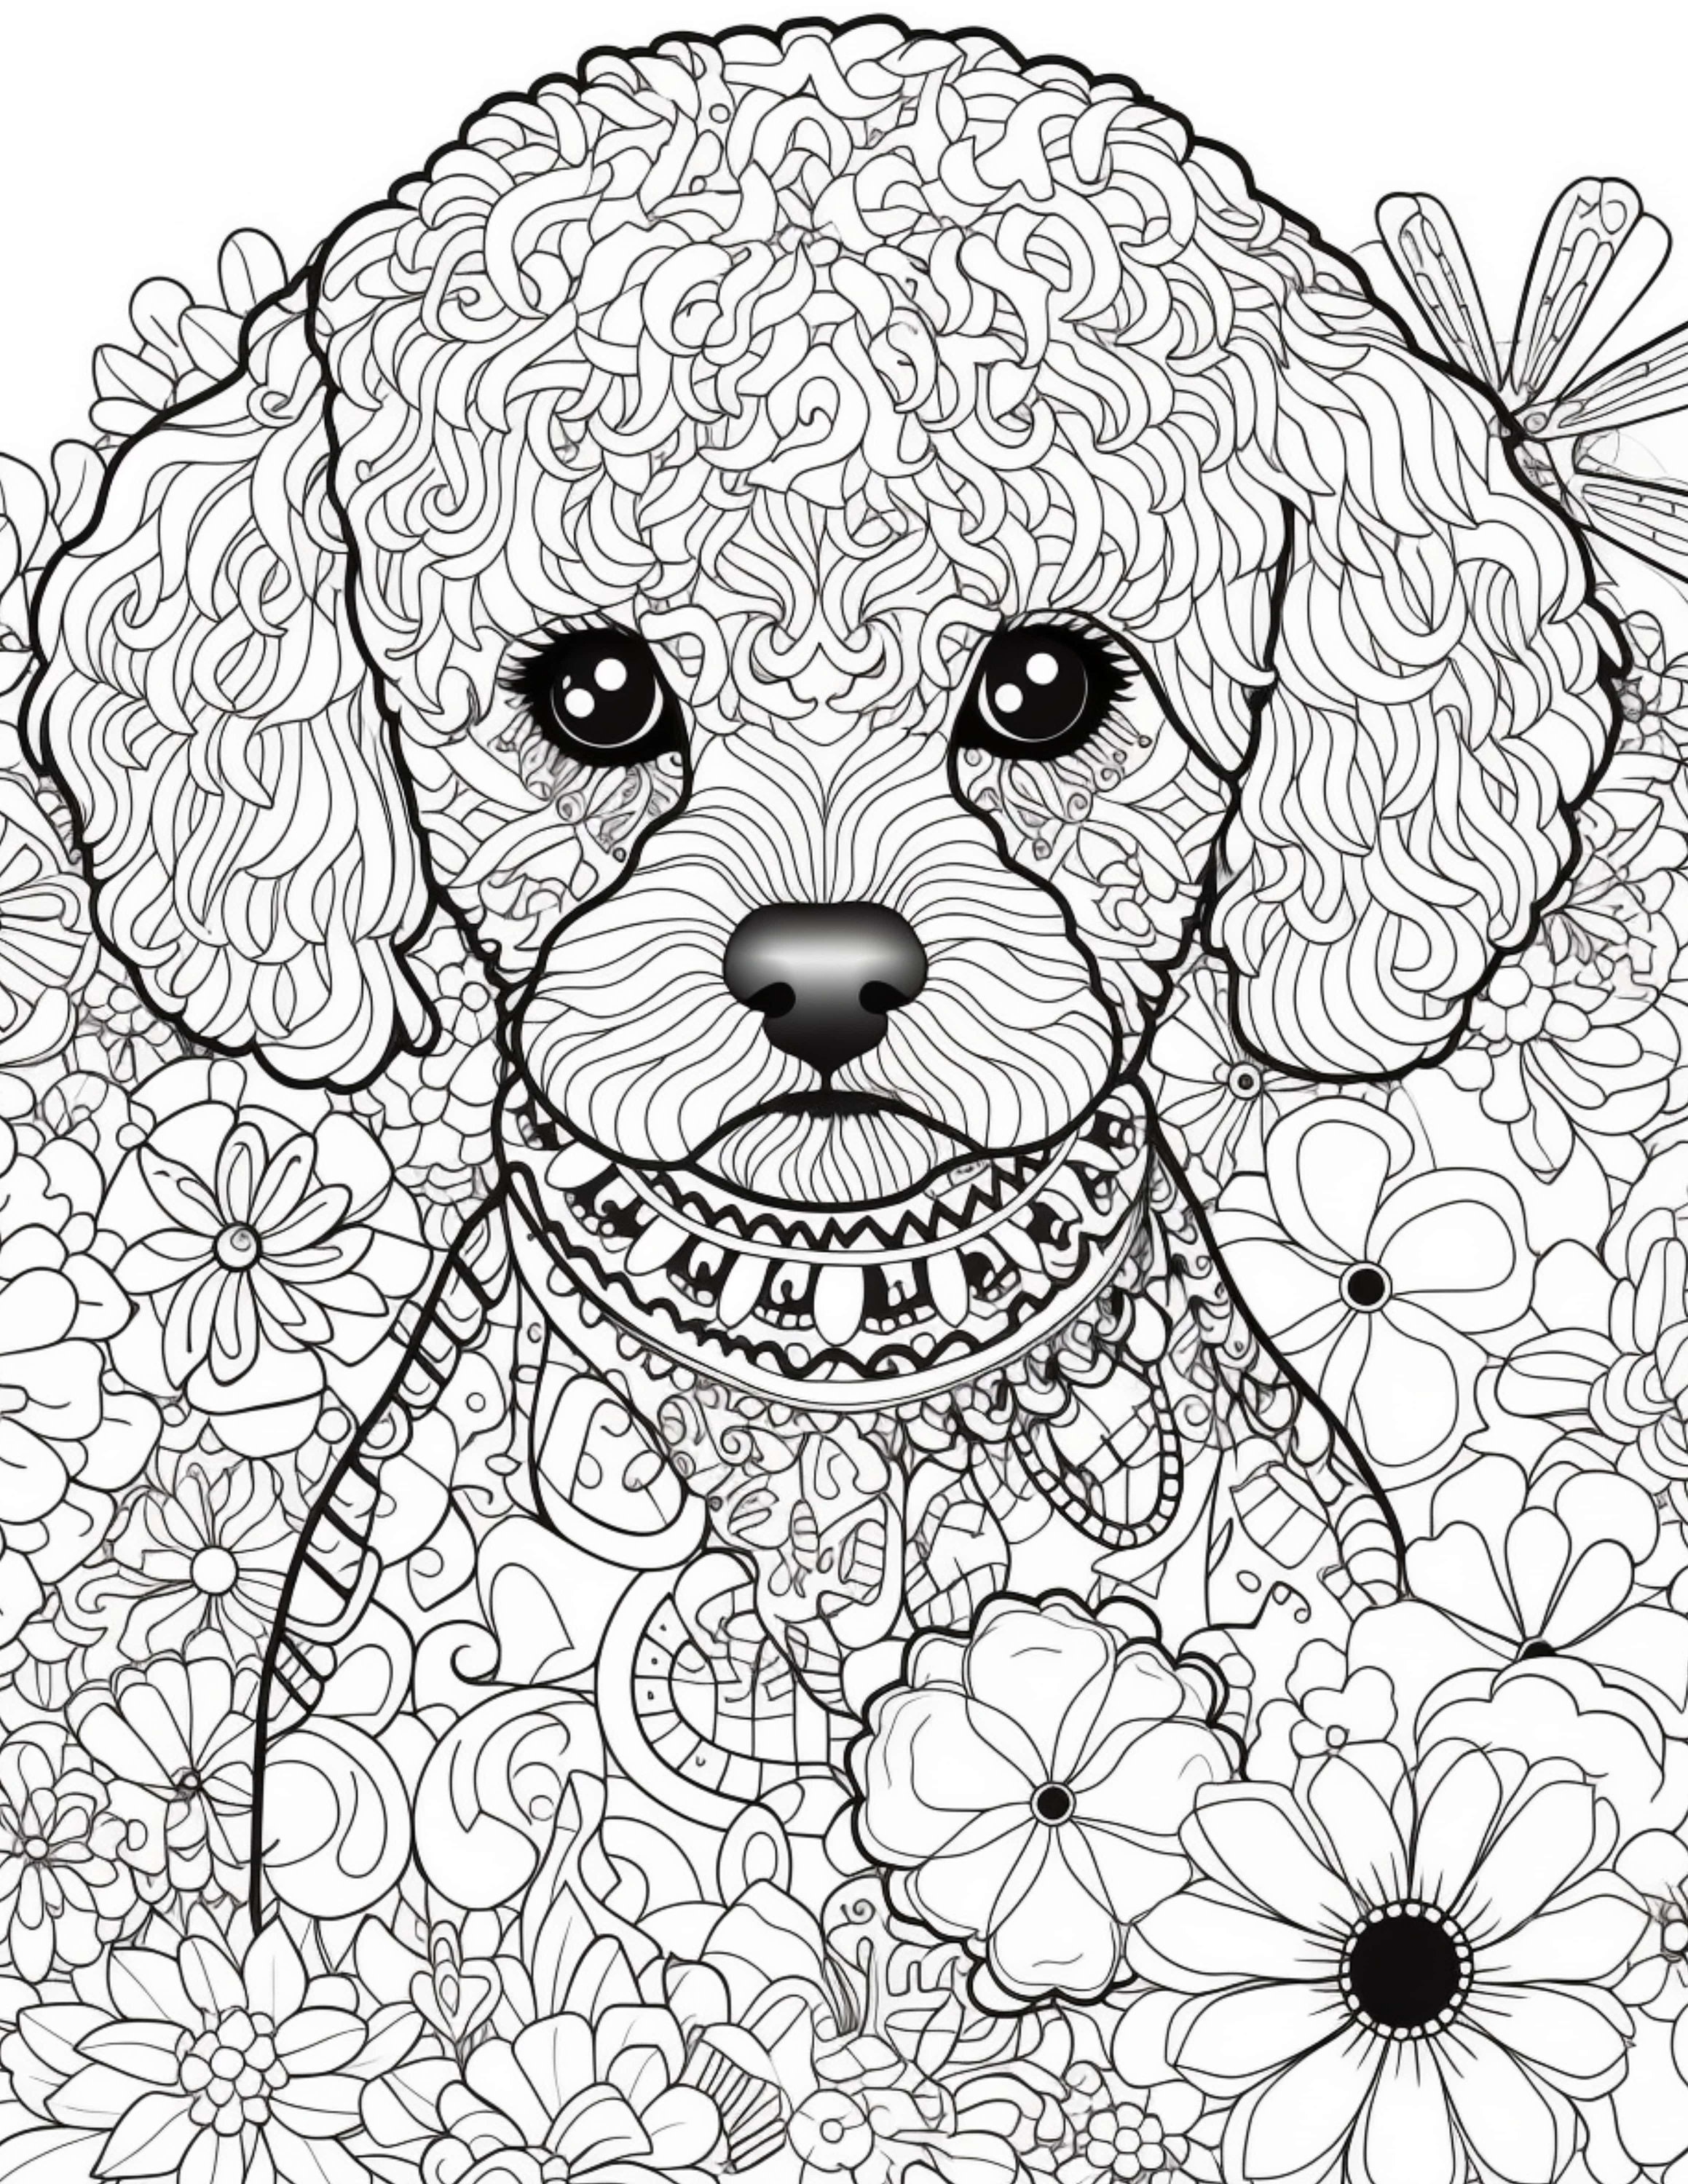 Oodles of Dogs Coloring Book for Kids - Volume 1